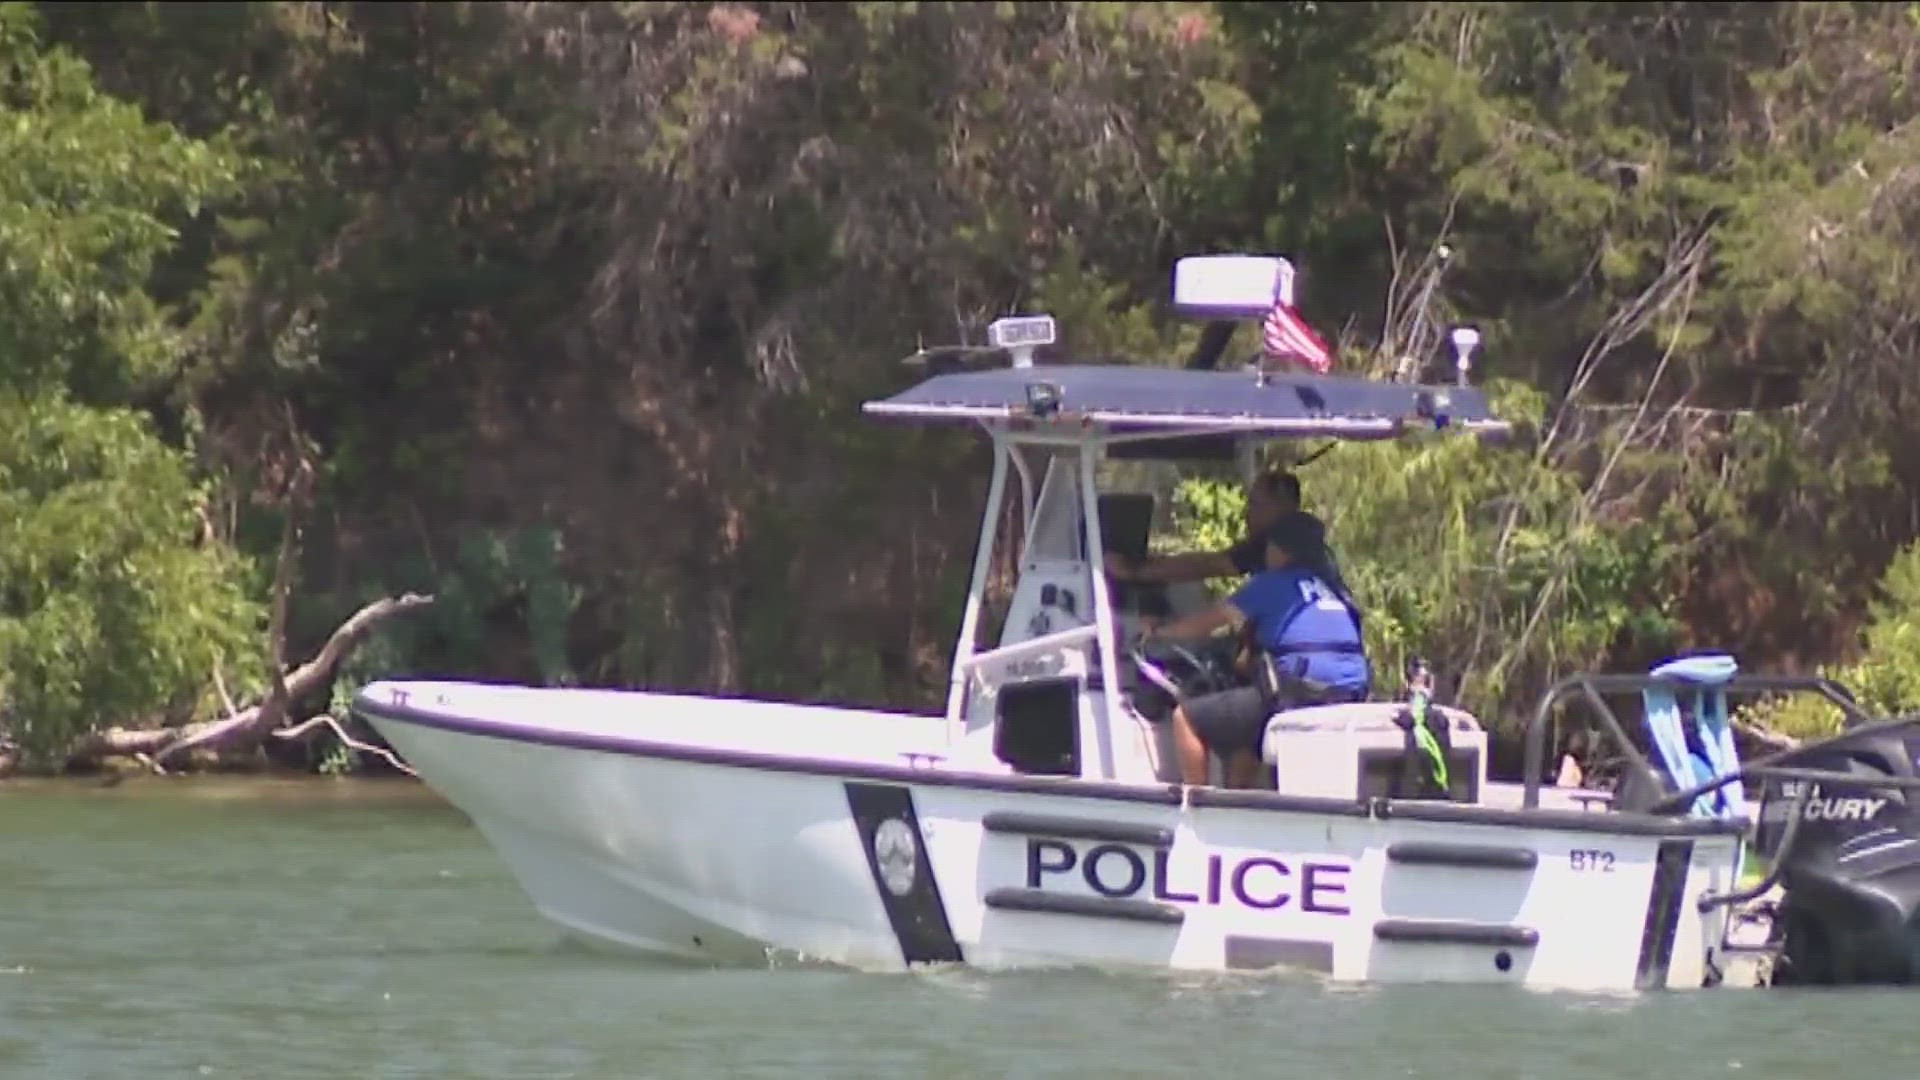 It was a deadly weekend on Central Texas lakes. Fire responders were called to two serious boat crashes on Sunday.